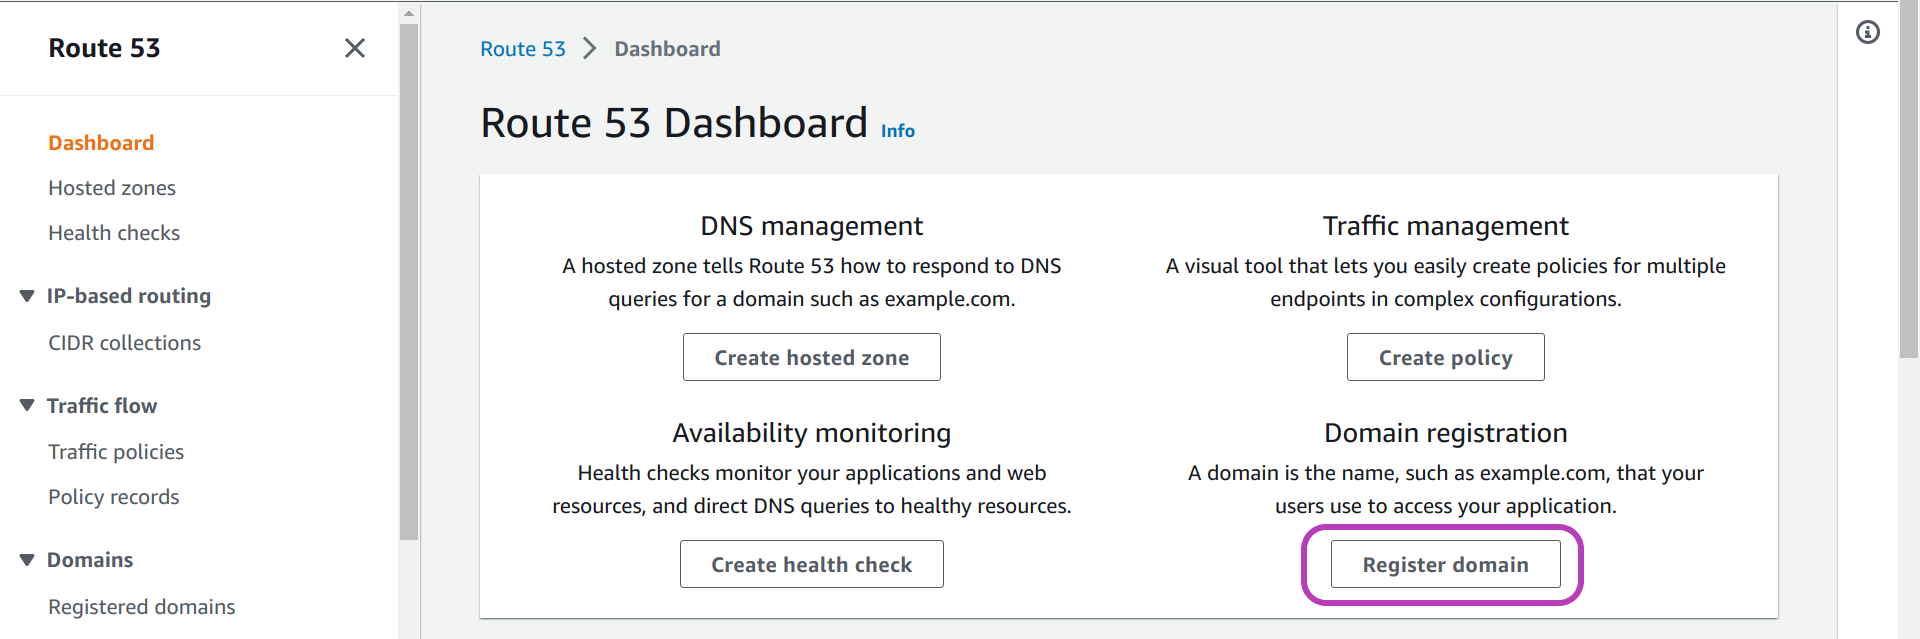 Screenshot of AWS Console "Route 53 Dashboard" page in a browser with the option "Register domain" on the bottom right circled